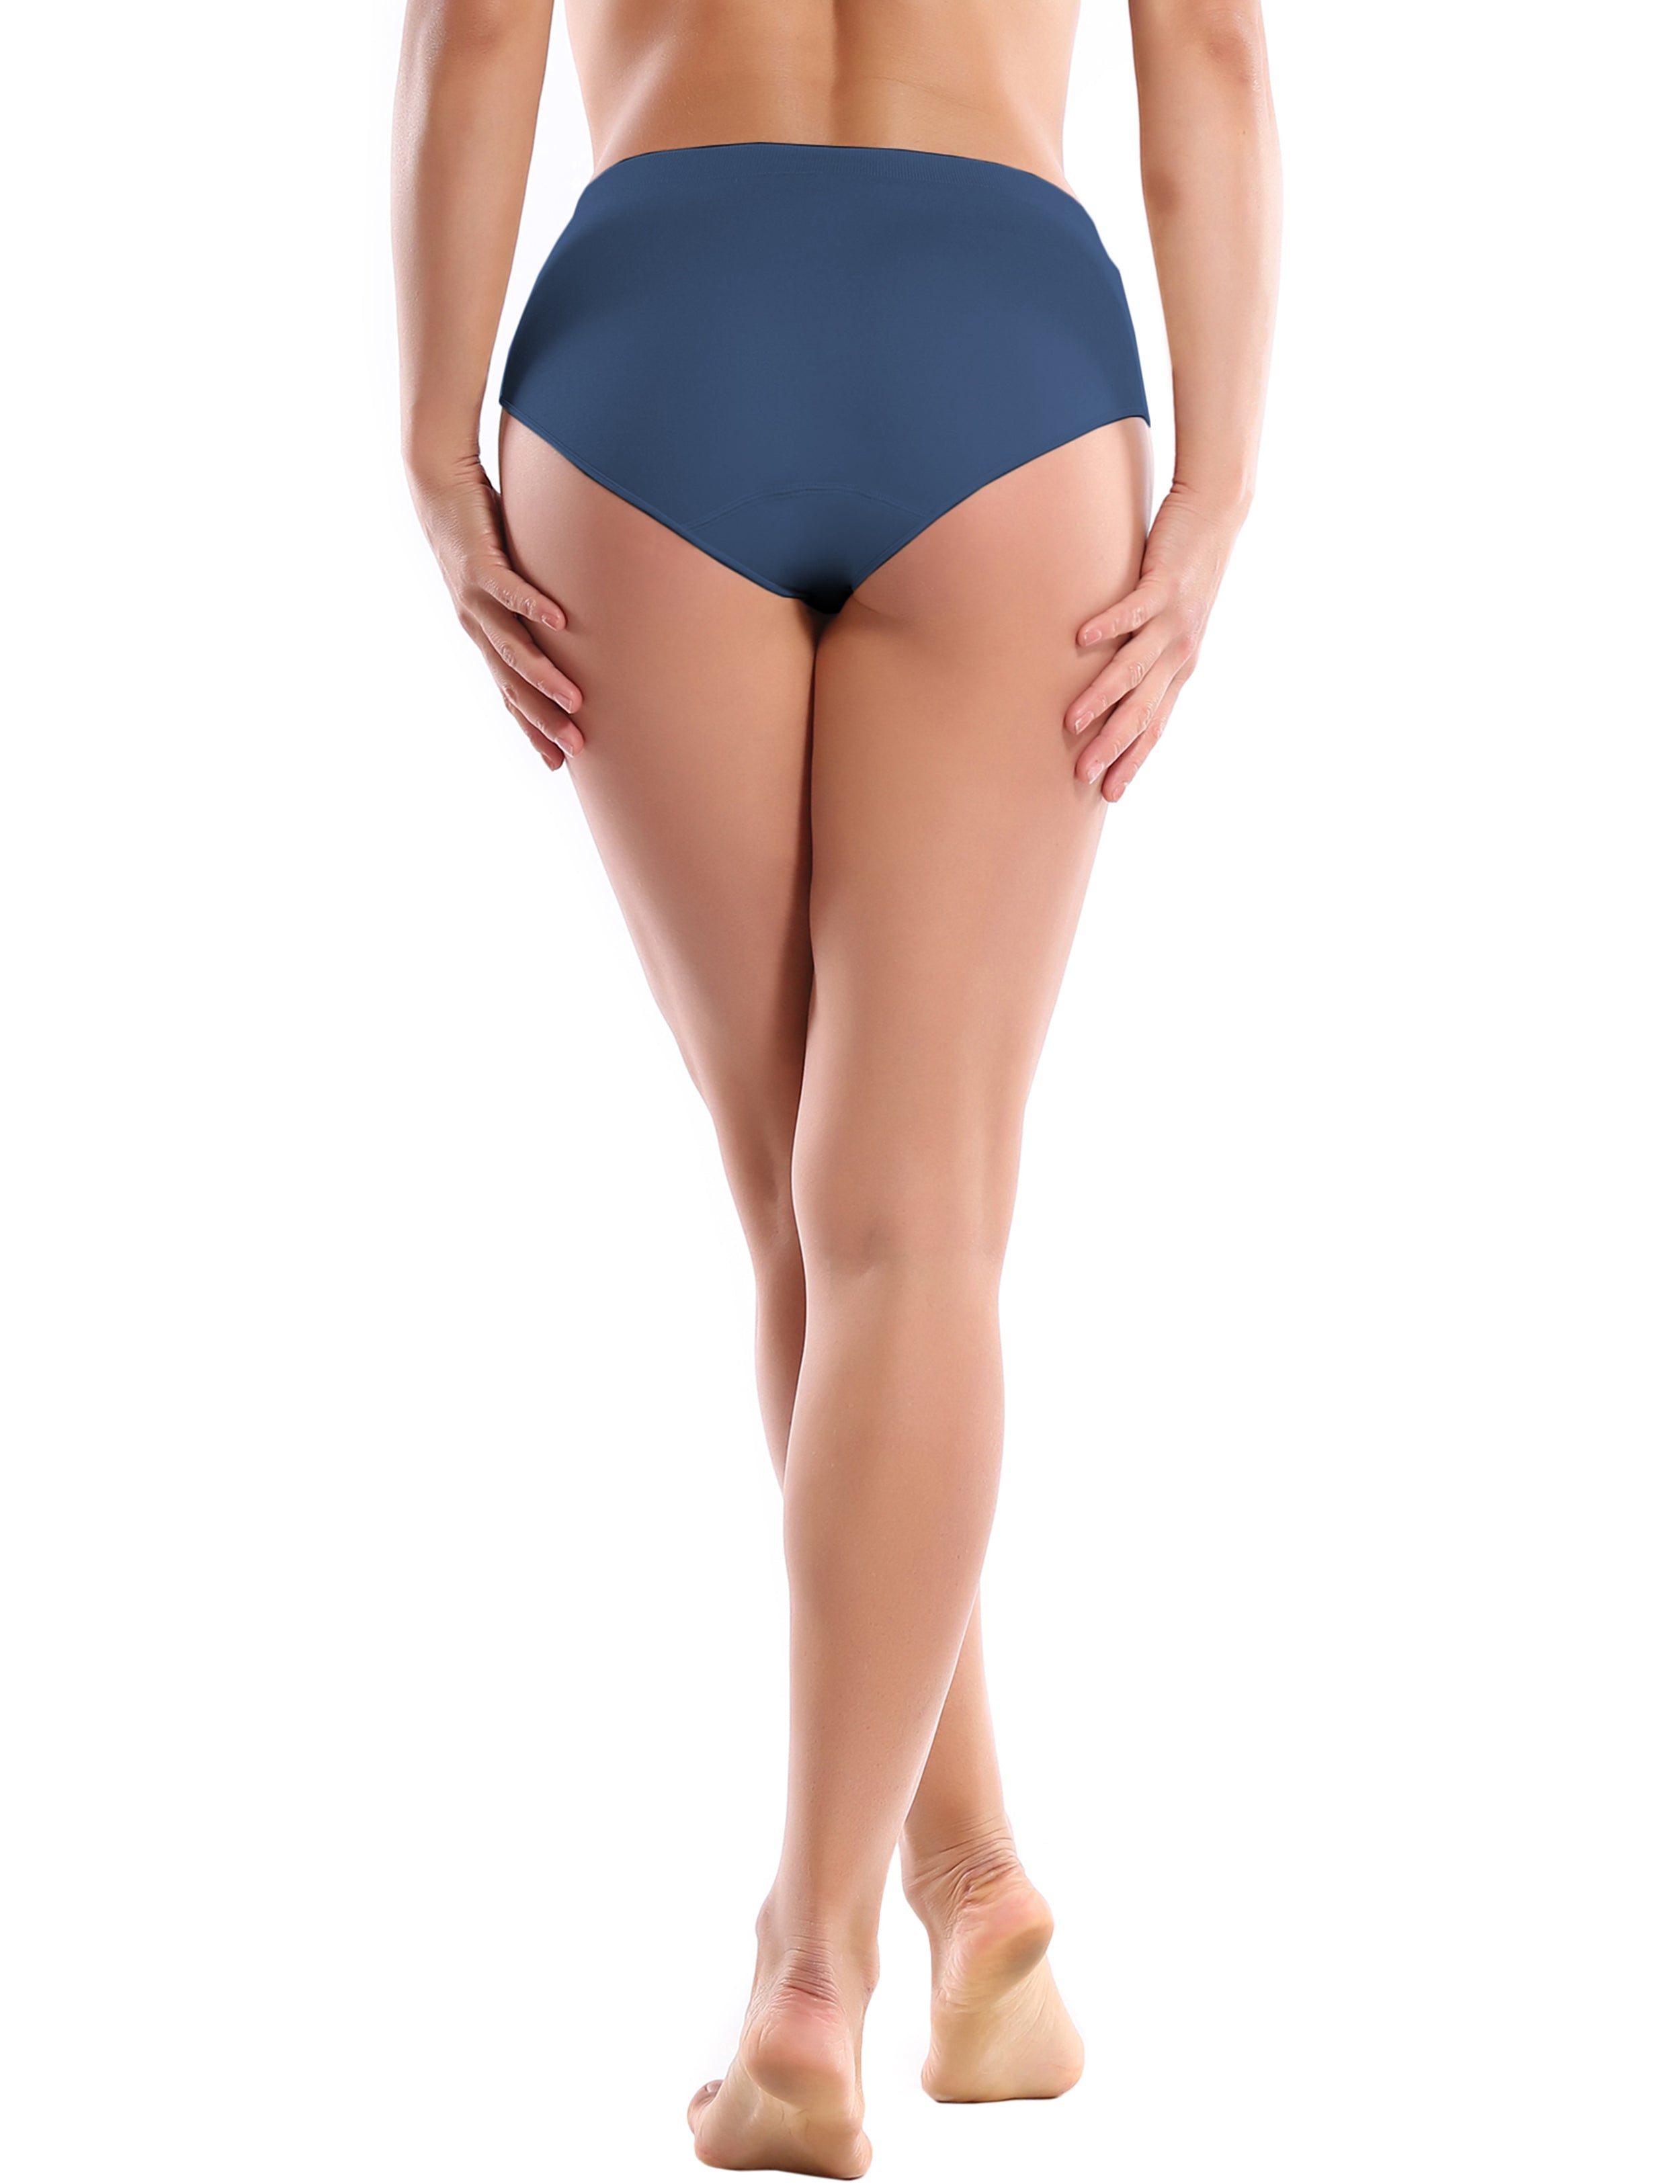 Seamless Sport Bikini Panties darknavy Sleek, smooth and streamlined: designed in our extra-soft knit material, this seamless thong embraces everyday comfort. Here with an allover heathered effect. Weave threads one by one High elasticity Softest-ever fabric Unsealed Comfortable No back coverage Machine wash.